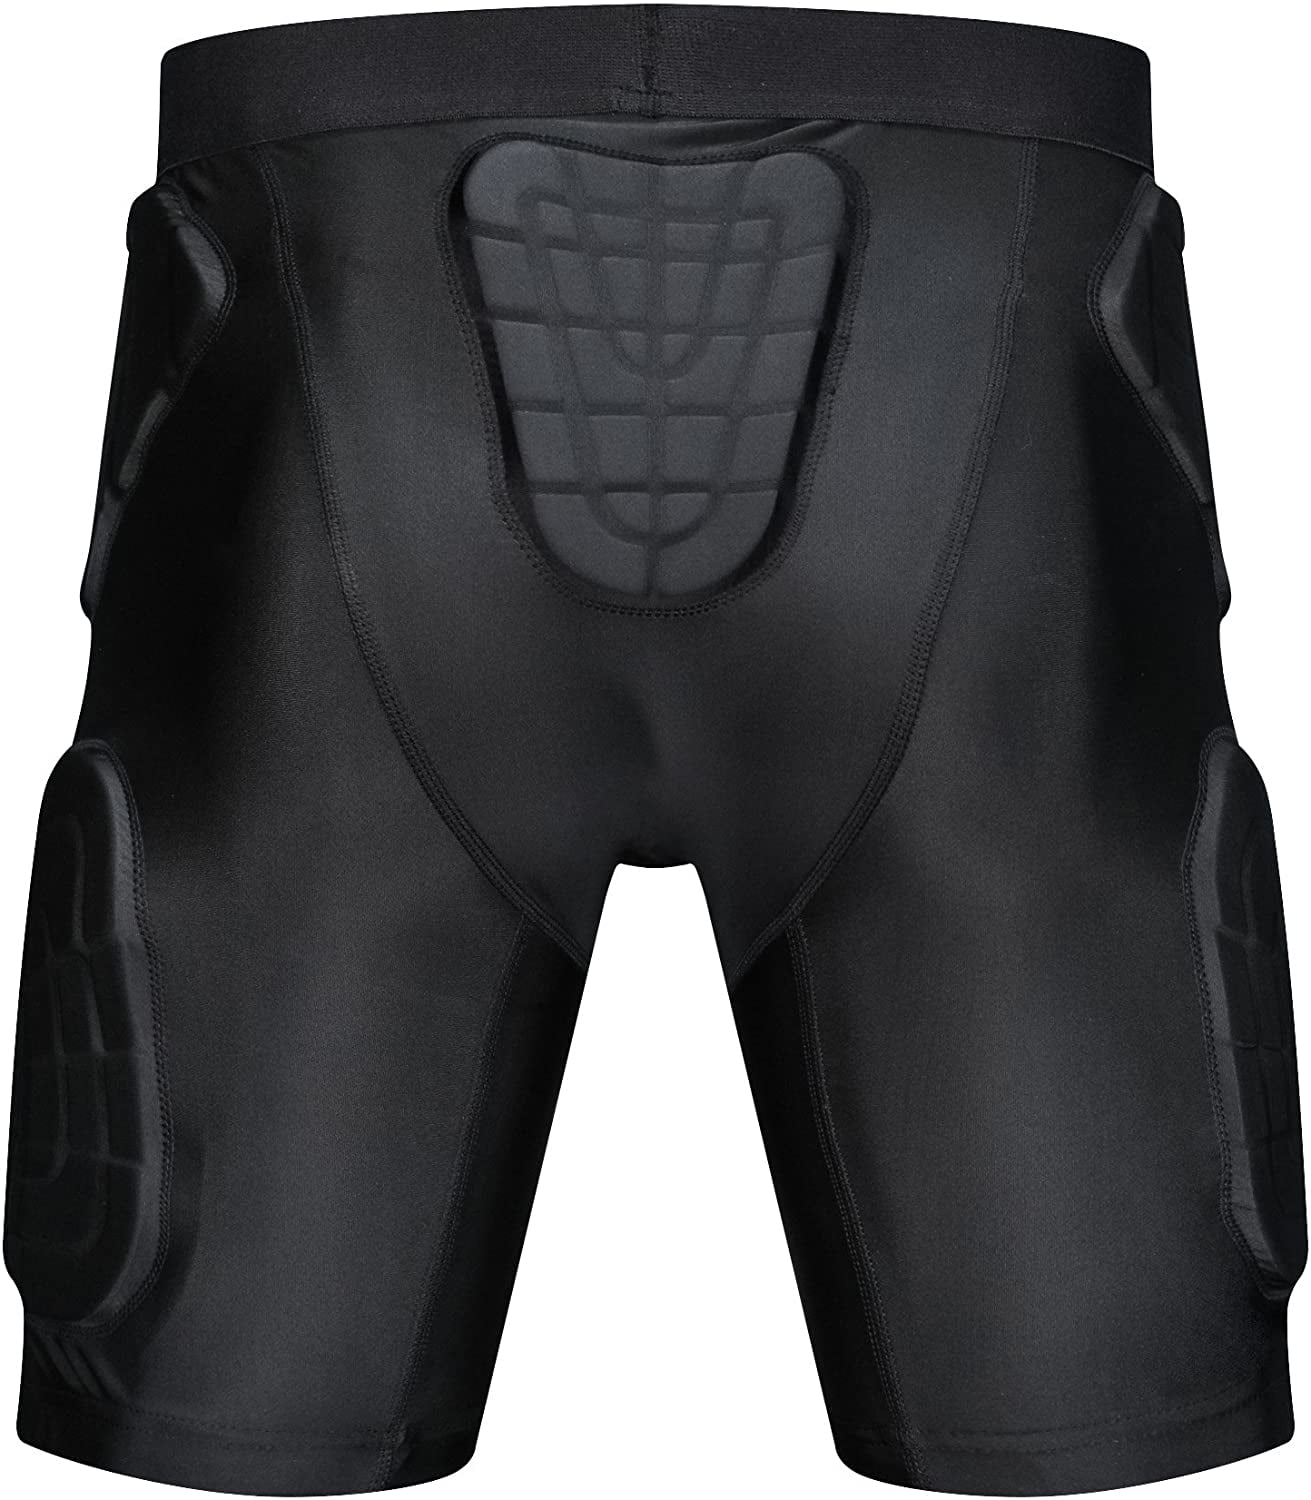 TUOY Men's Padded Compression Shorts 5 Pads Football Girdle Hip